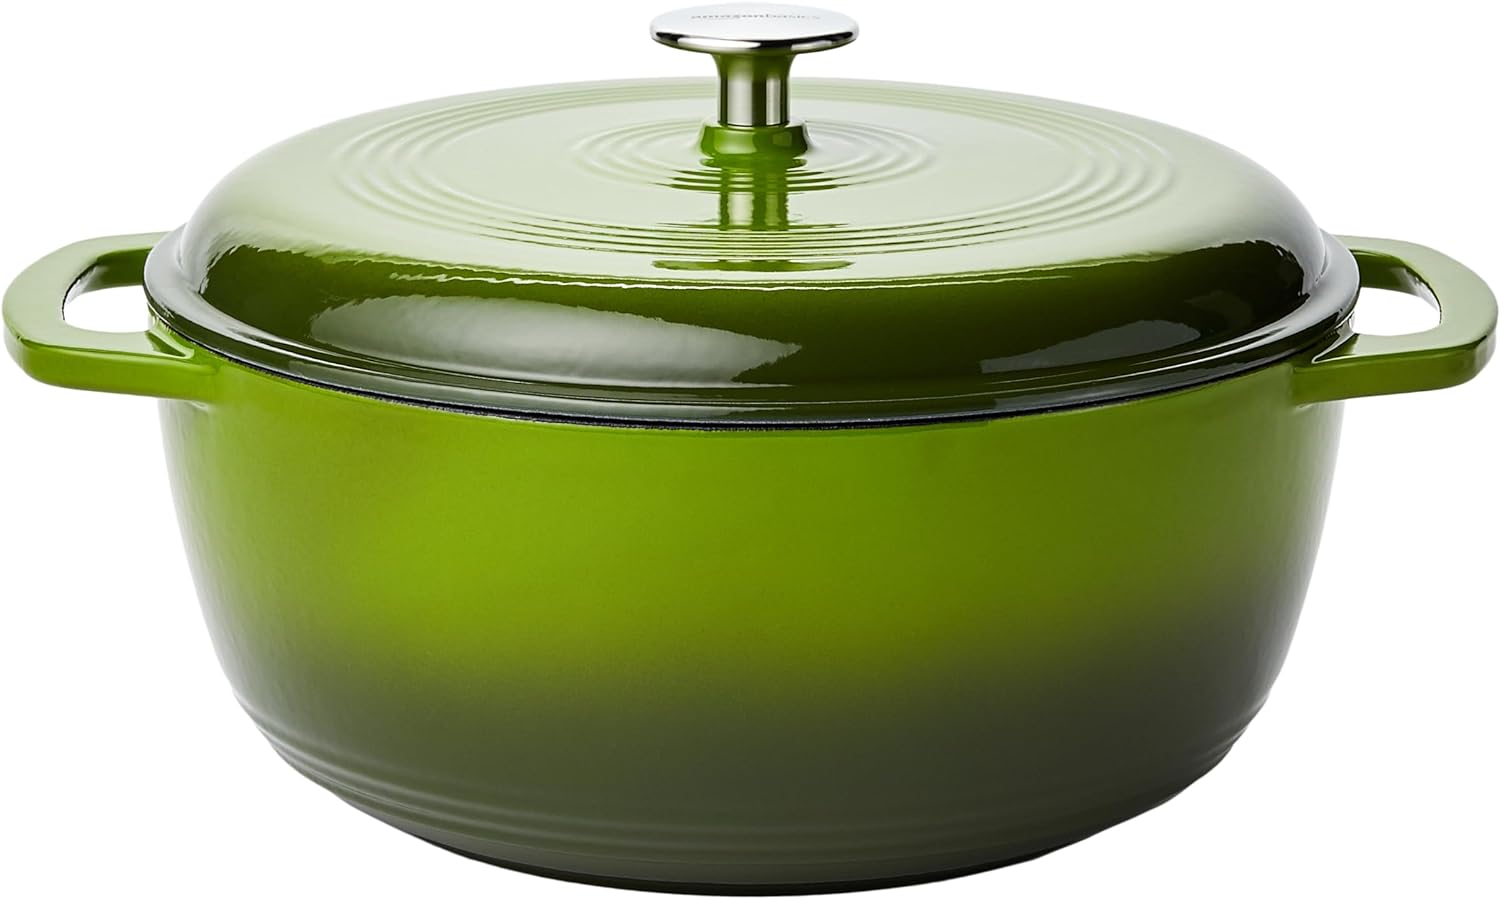 This Le Creuset Dutch Oven Dupe Is Only $25—and I Need One ASAP